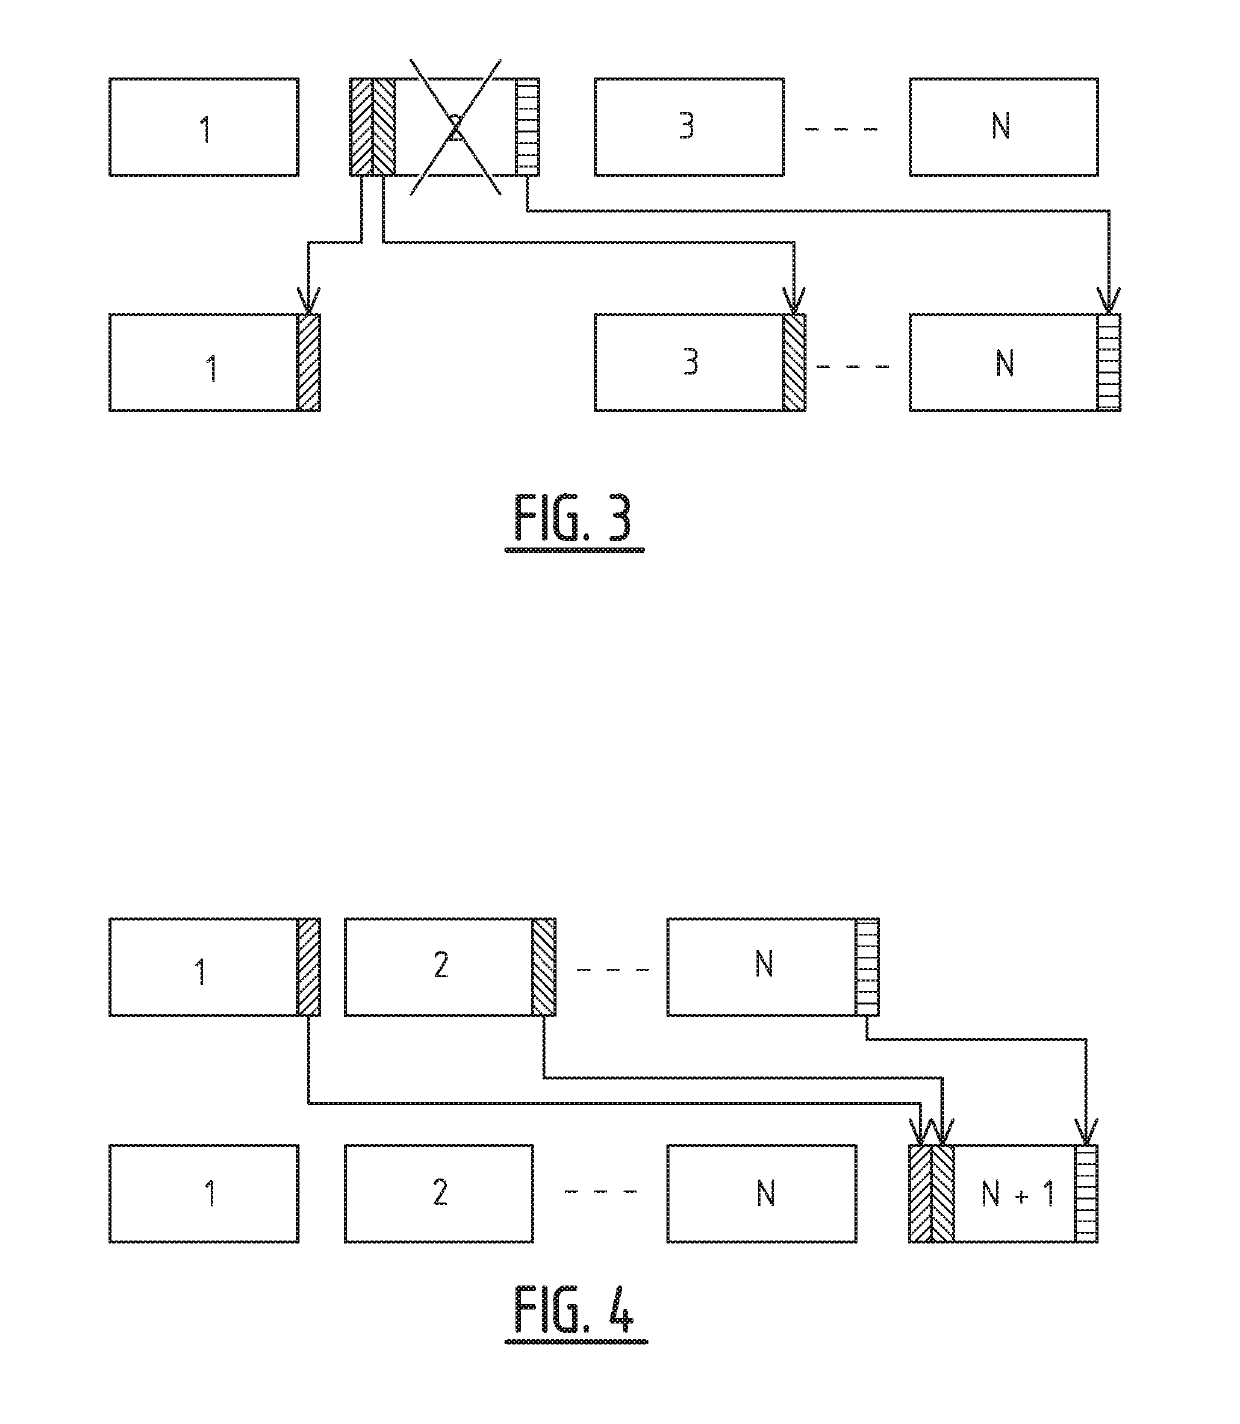 Method of processing a geospatial dataset